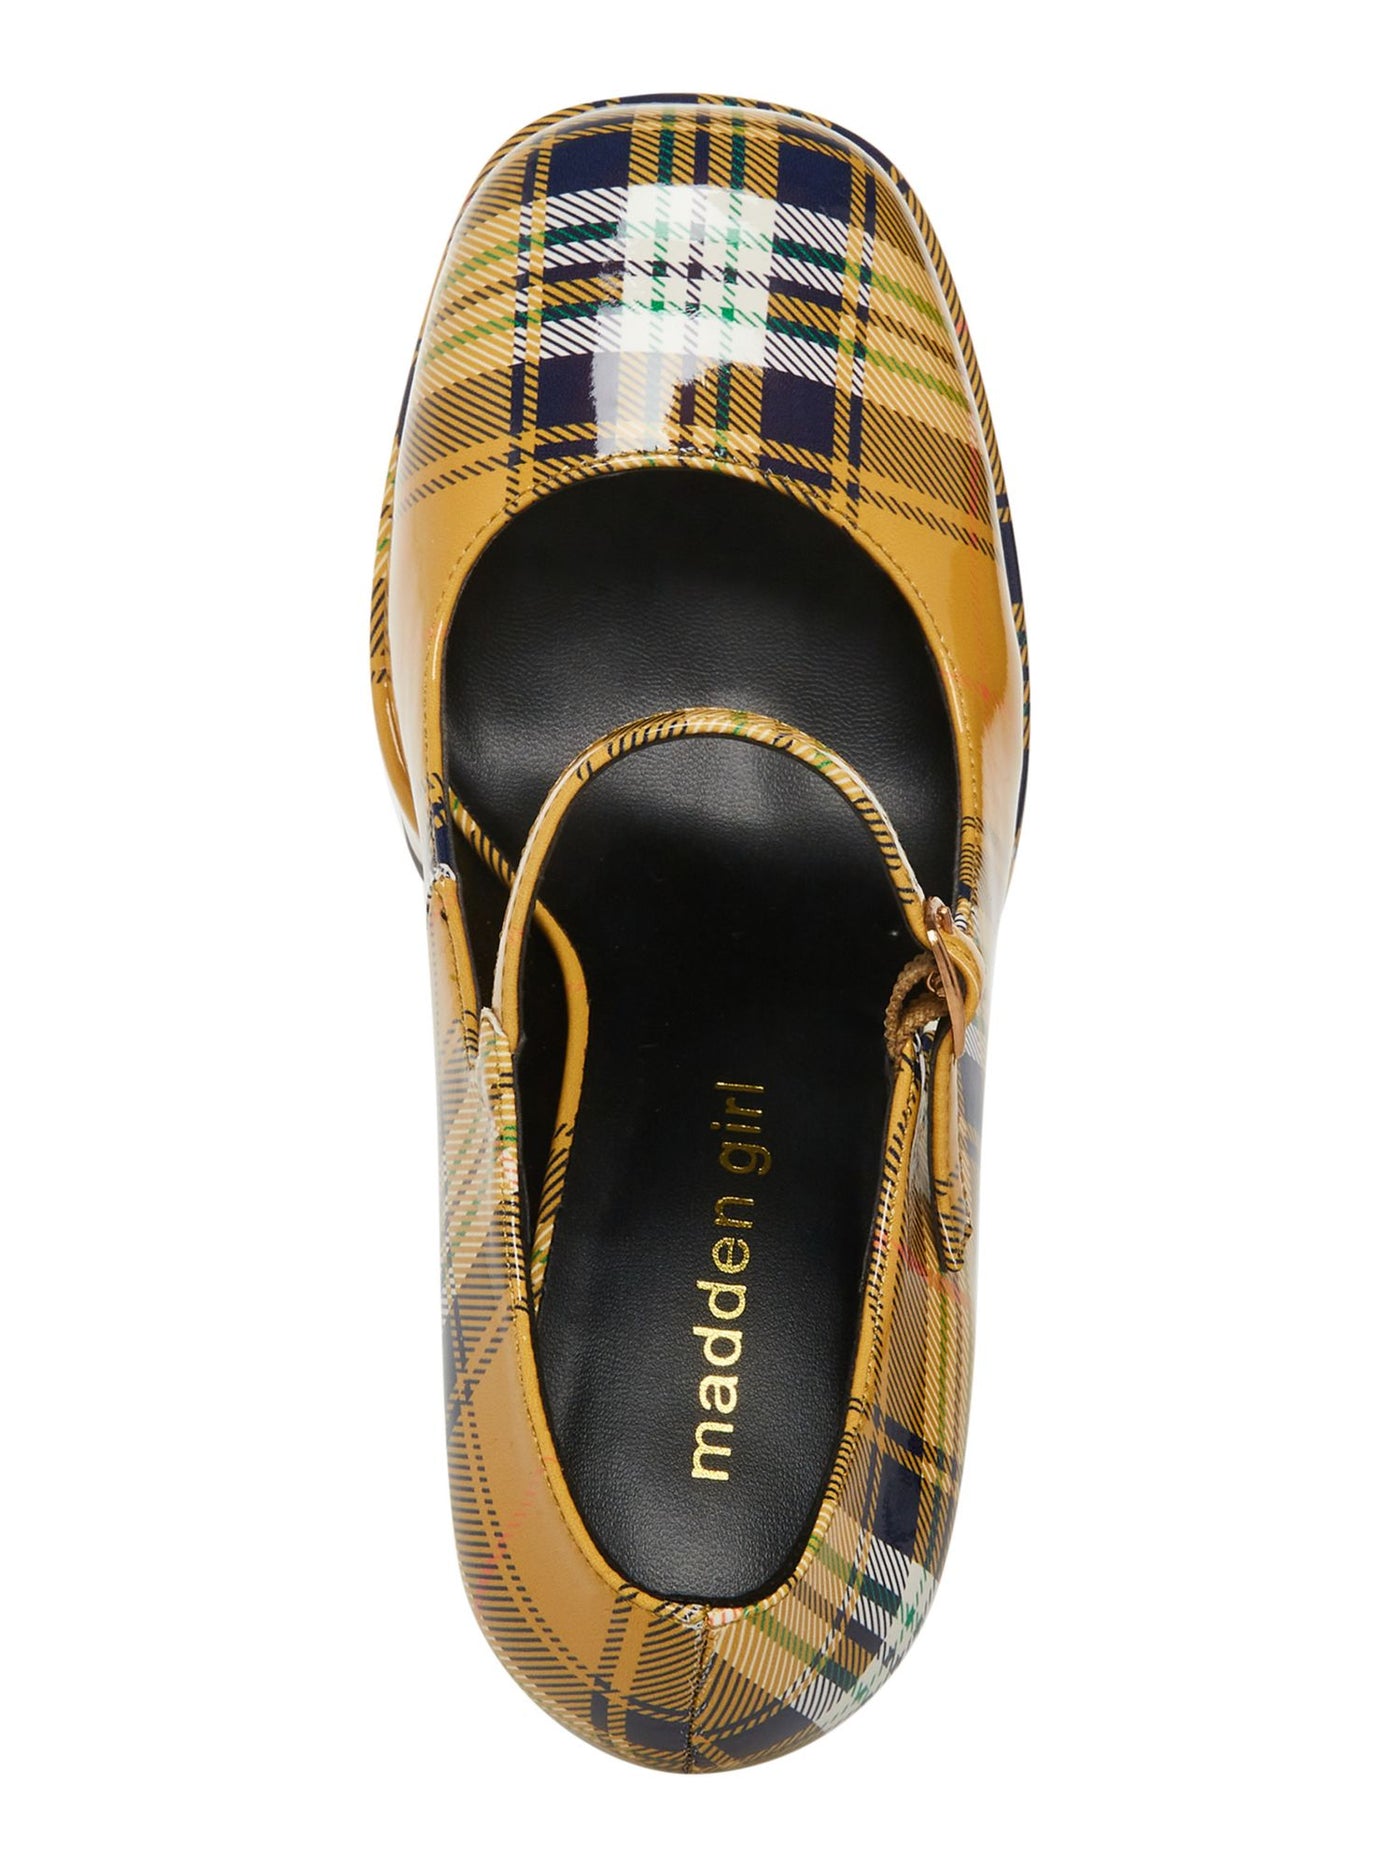 MADDEN GIRL Womens Yellow Plaid Pumps 2" Platform Padded Khloe Square Toe Sculpted Heel Buckle Dress Mary Jane 6.5 M